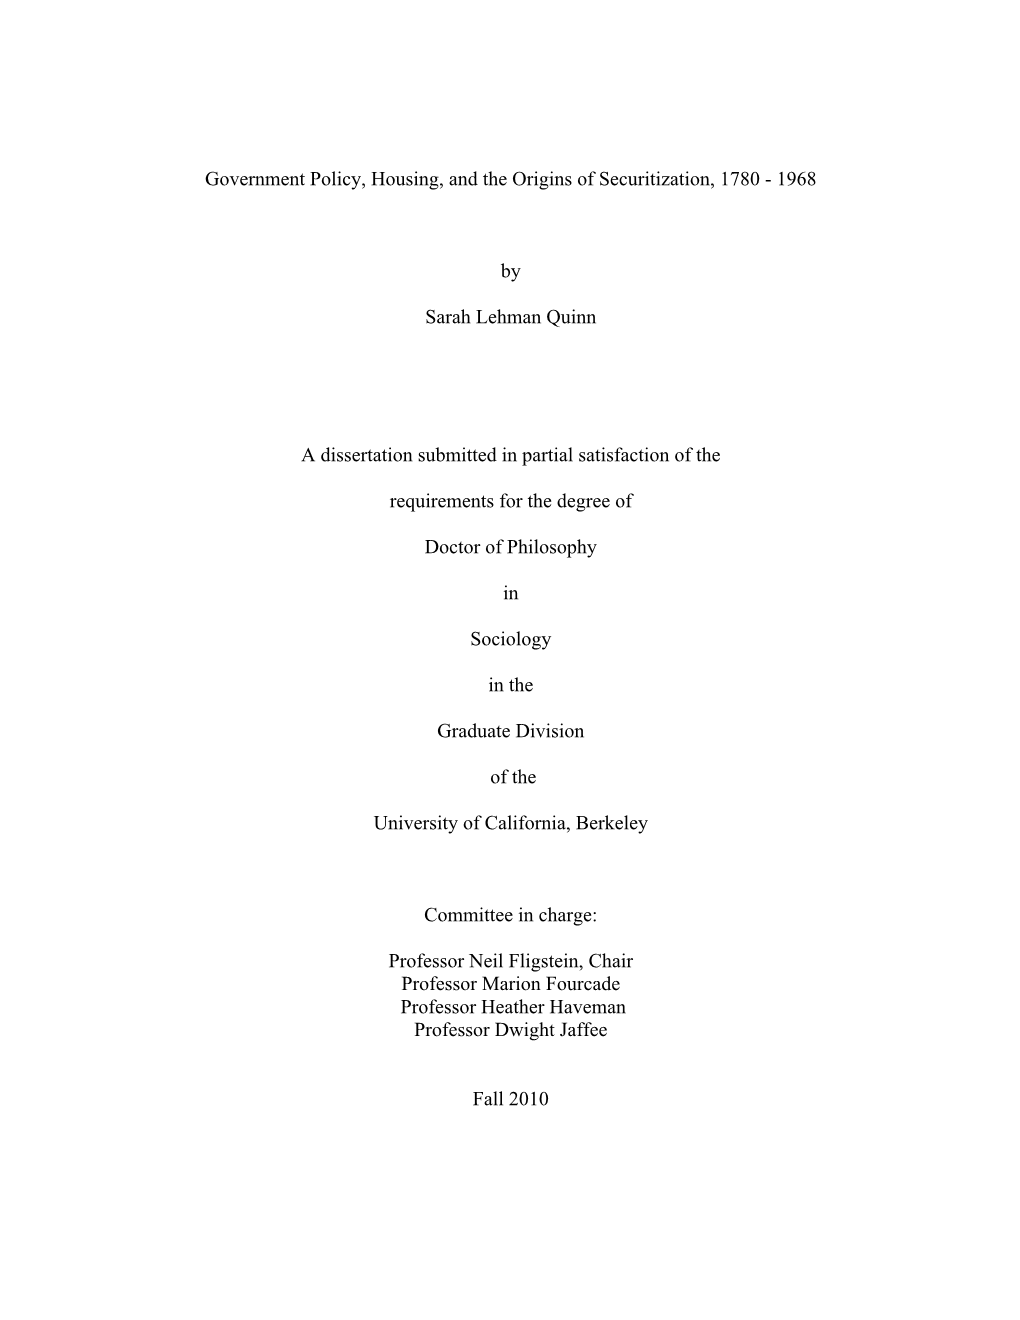 Government Policy, Housing, and the Origins of Securitization, 1780 - 1968